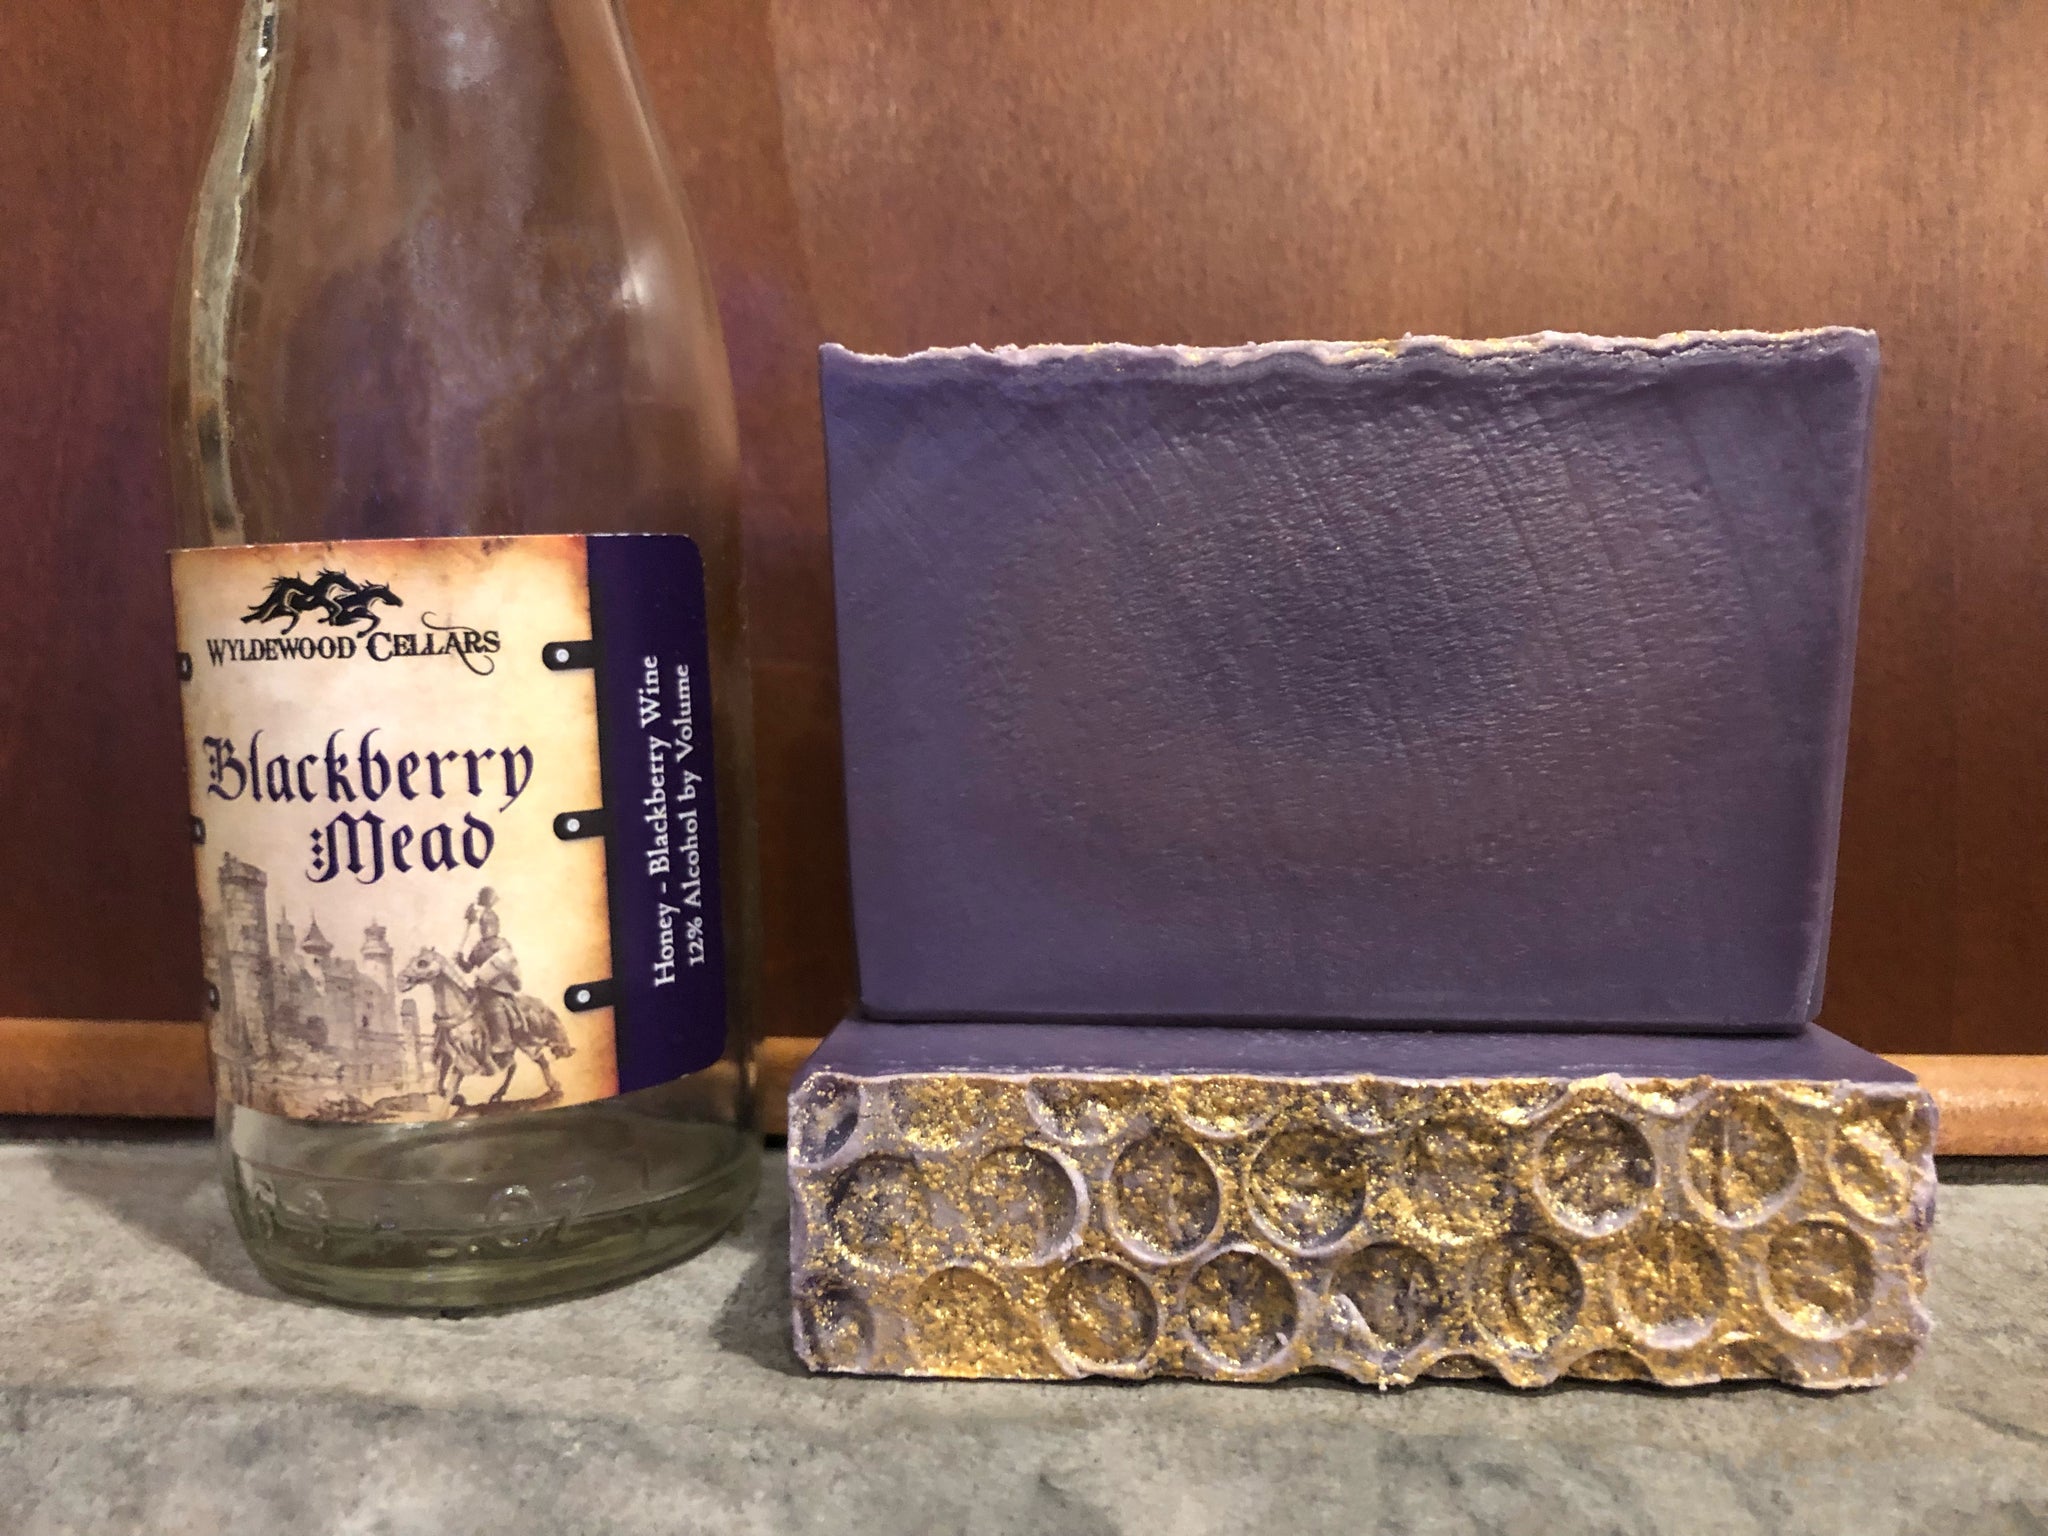 mead soap for sale handcrafted by spunkndisorderly beer soaps with blackberry mead blackberry wine from Wyldewood Cellars purple mead soap topped with gold sparkle and honeycomb design artisan cold process soap